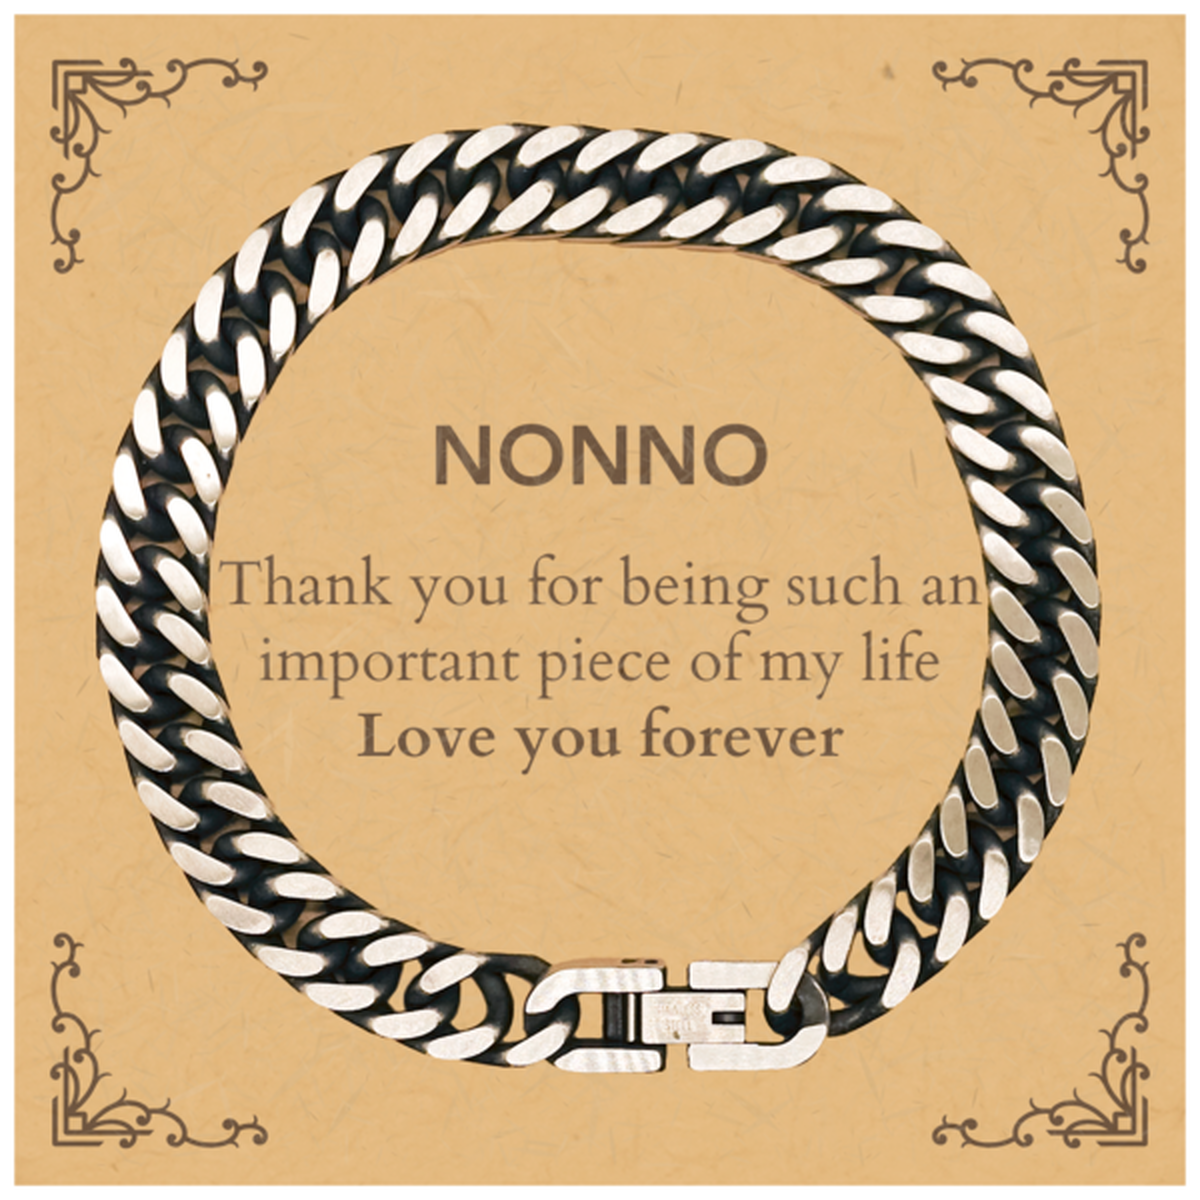 Appropriate Nonno Cuban Link Chain Bracelet Epic Birthday Gifts for Nonno Thank you for being such an important piece of my life Nonno Christmas Mothers Fathers Day